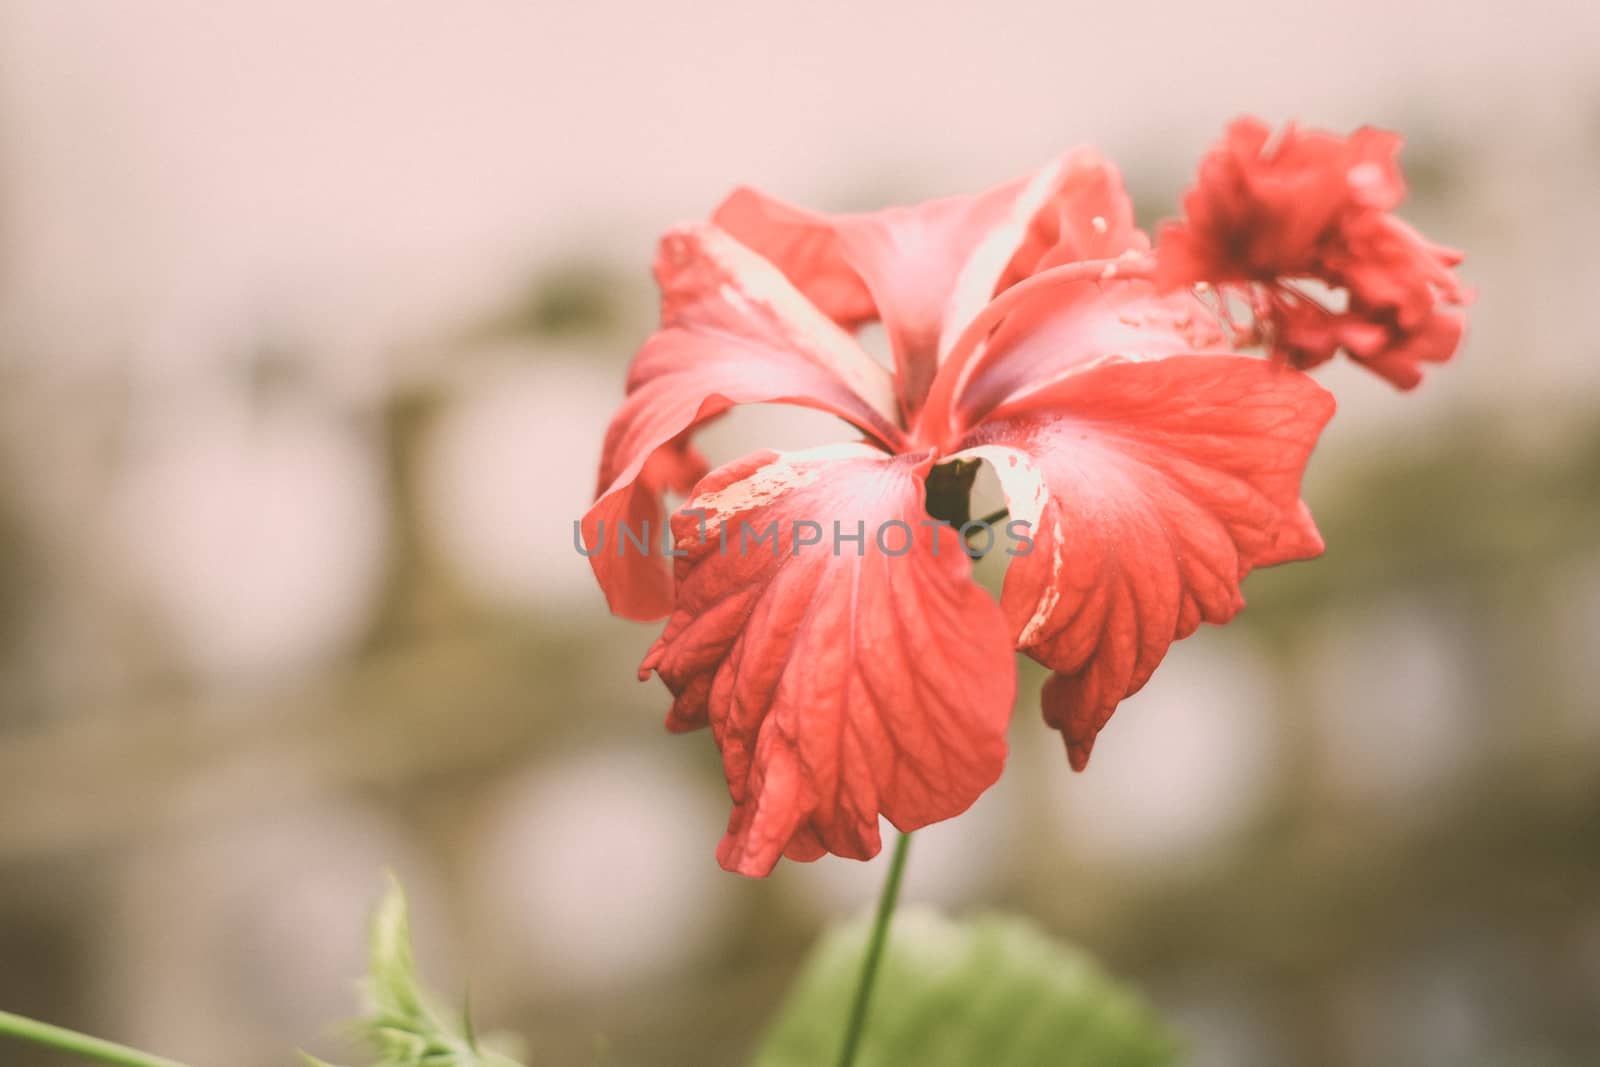 One Chaba flower (Hibiscus rosa-sinensis) chinese rose, red color, blooming in morning sunlight in isolated background. Vintage film look, With copy space room for text on left side of the image. by sudiptabhowmick